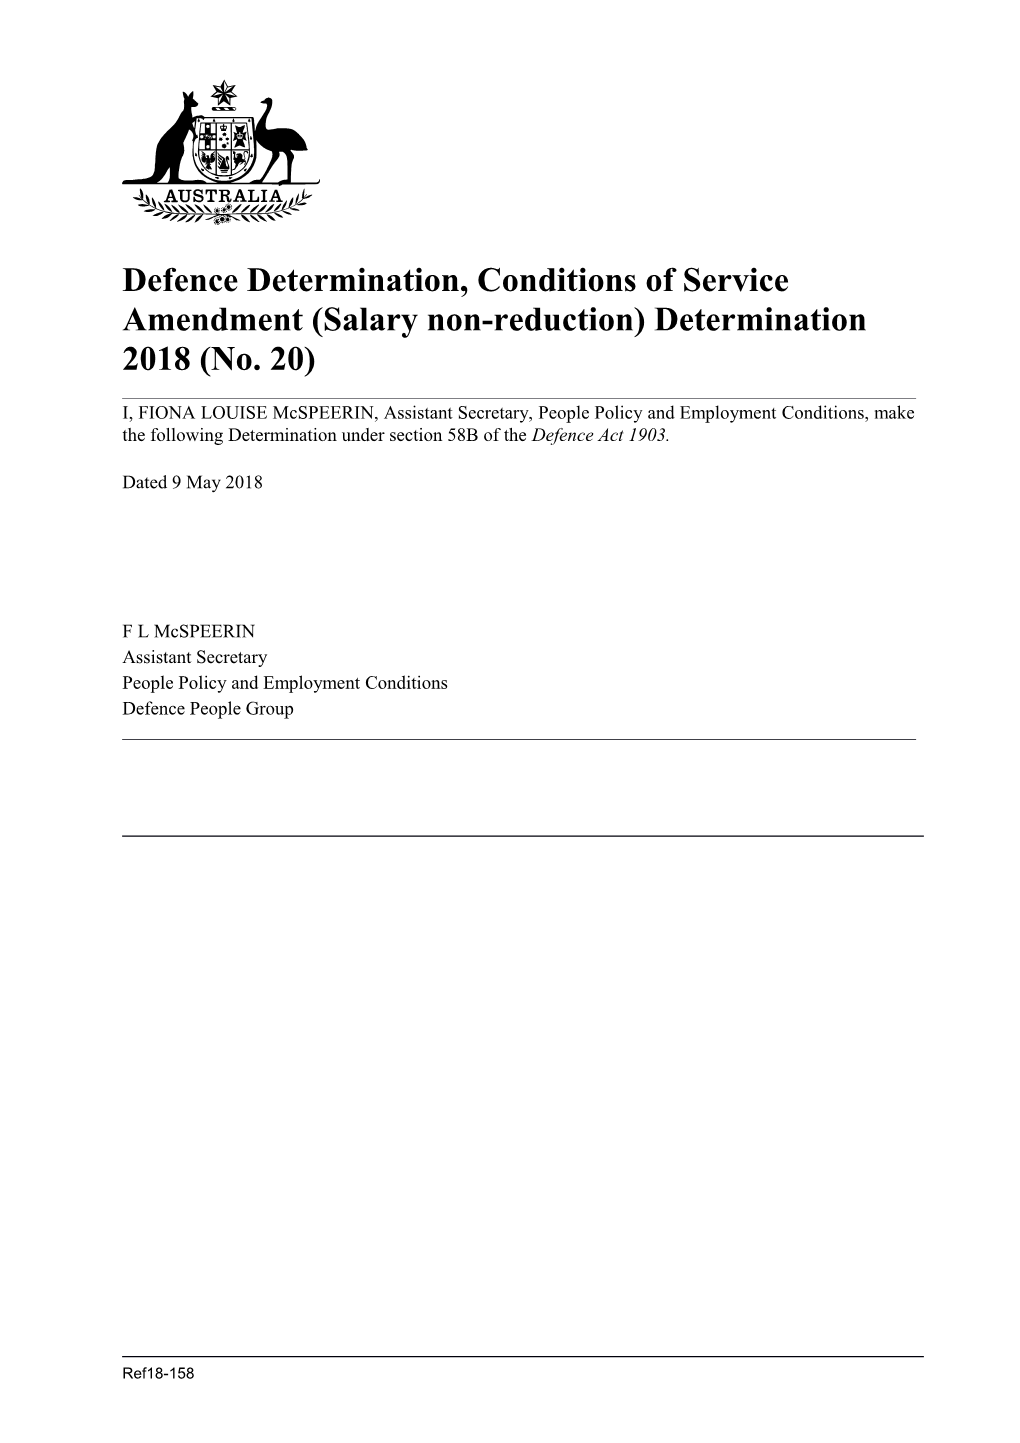 Defence Determination, Conditions of Service Amendment (Salary Non-Reduction) Determination